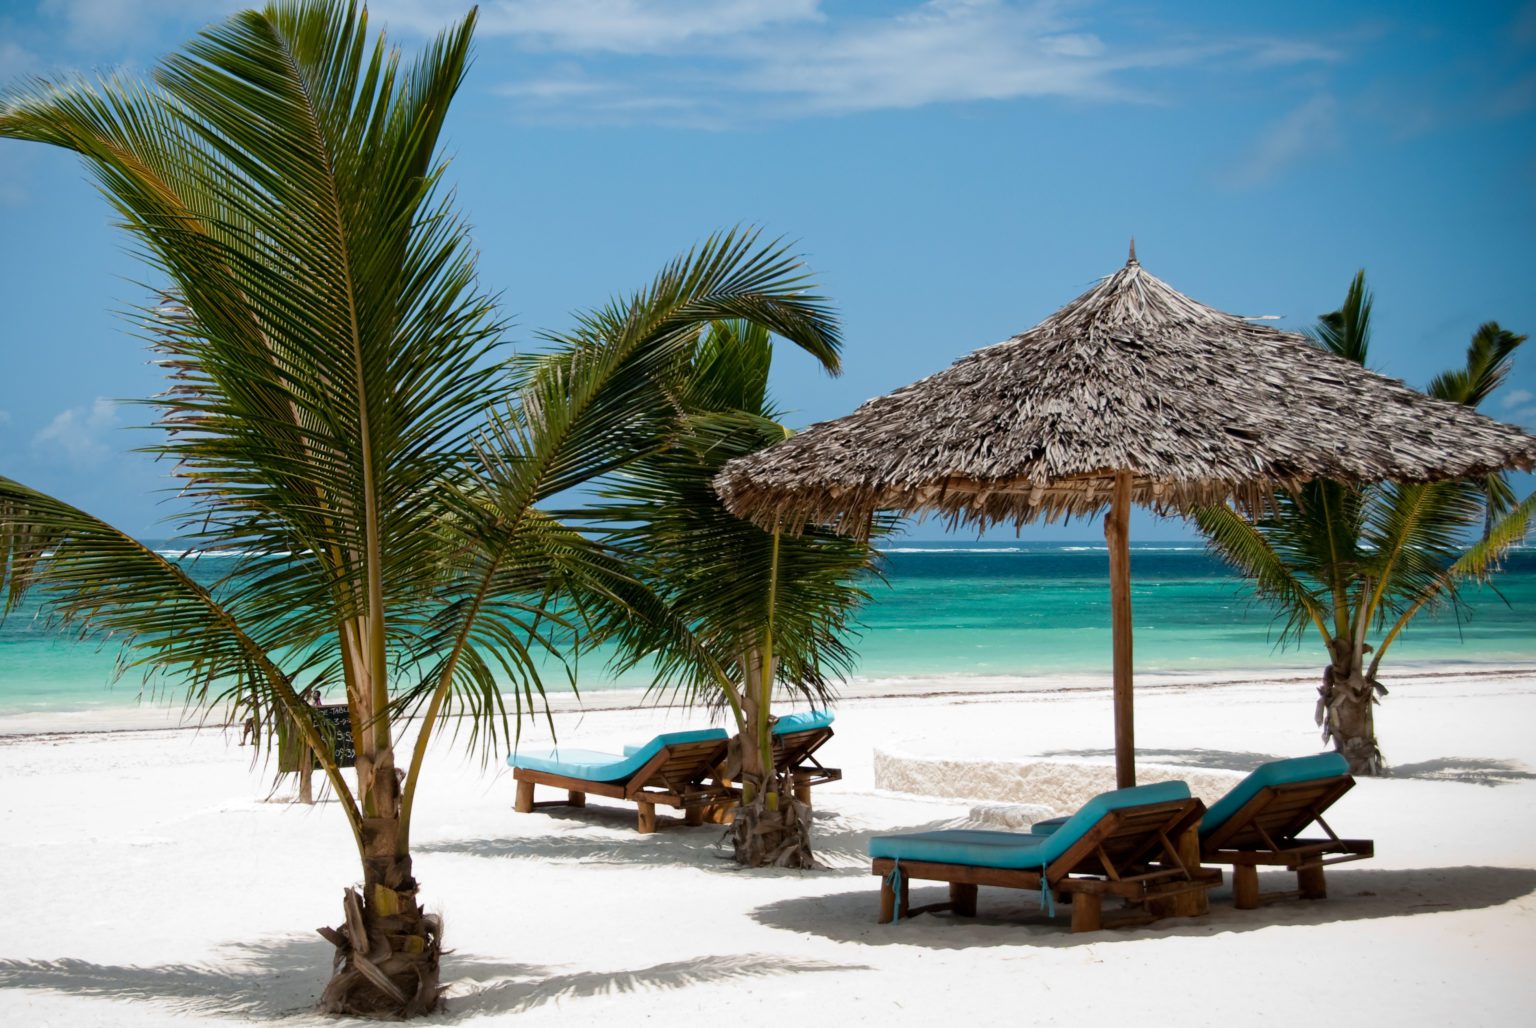 white sandy beaches with loungers, palm umbrellas and palm trees